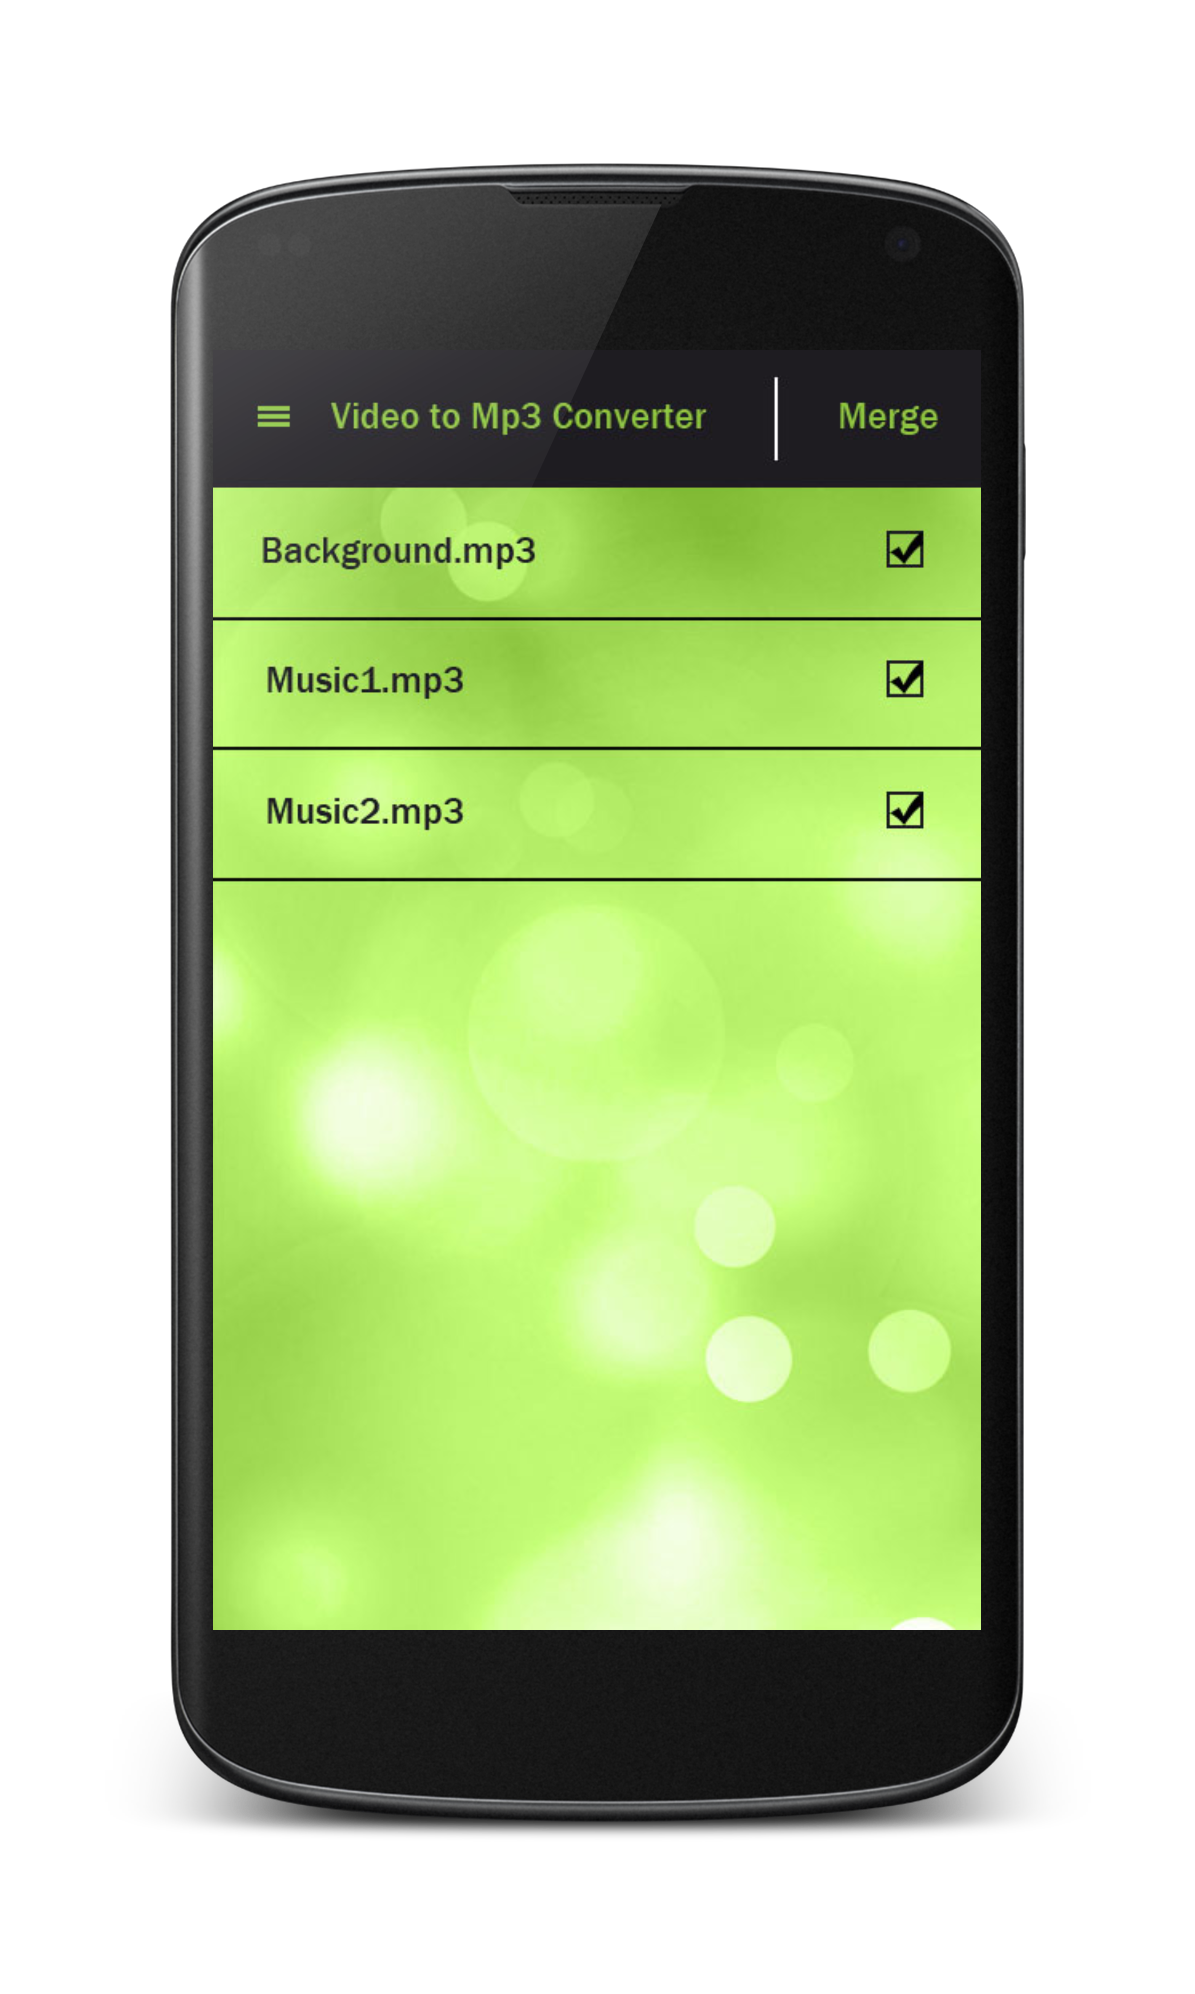 Video Mp3 Converter APK 1.10 for Android – Download Video Mp3 Converter APK  Latest Version from APKFab.com